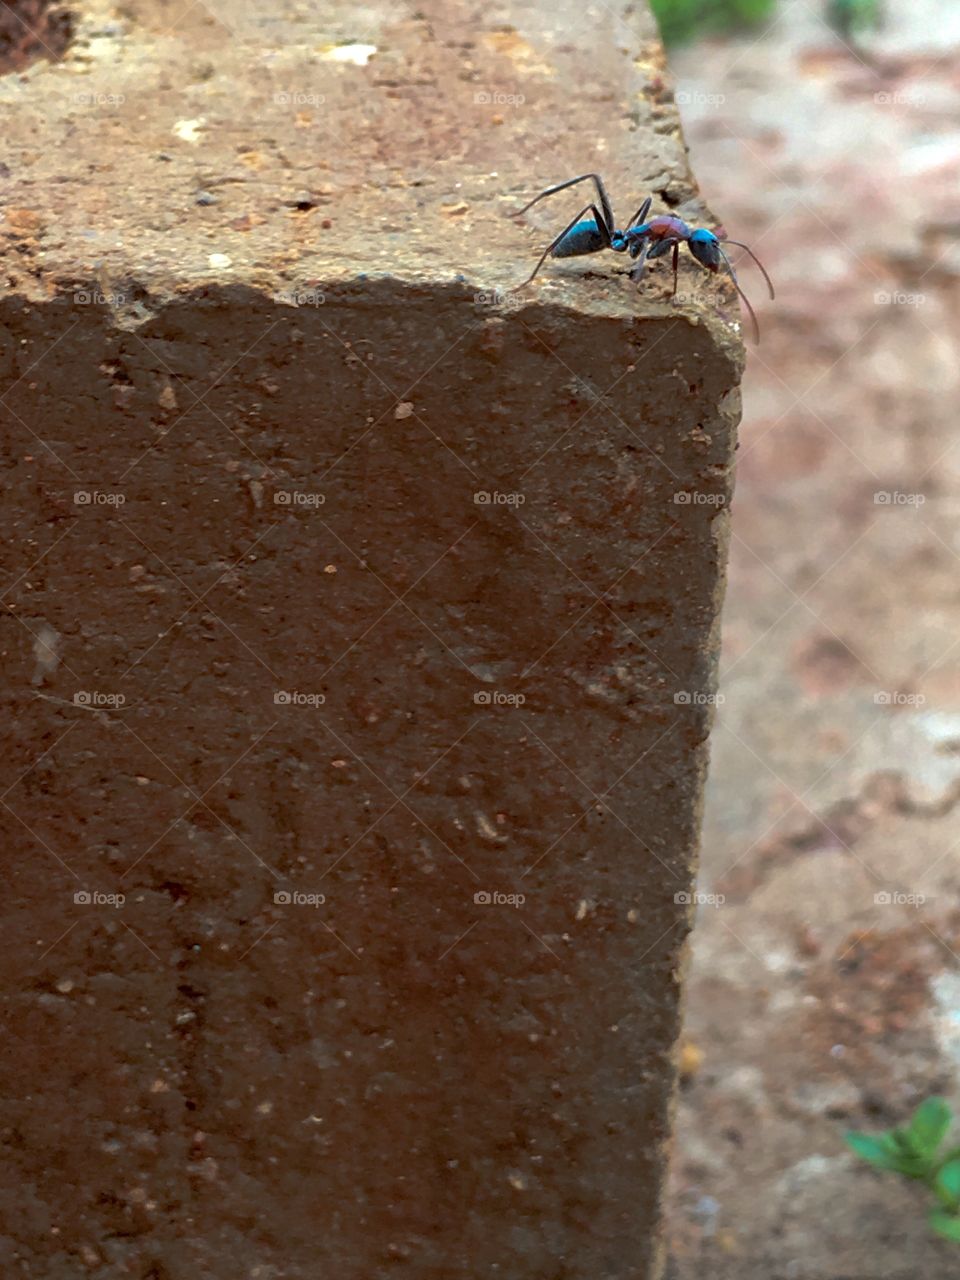 Large worker ant foraging on top edge of brick outdoors closeup